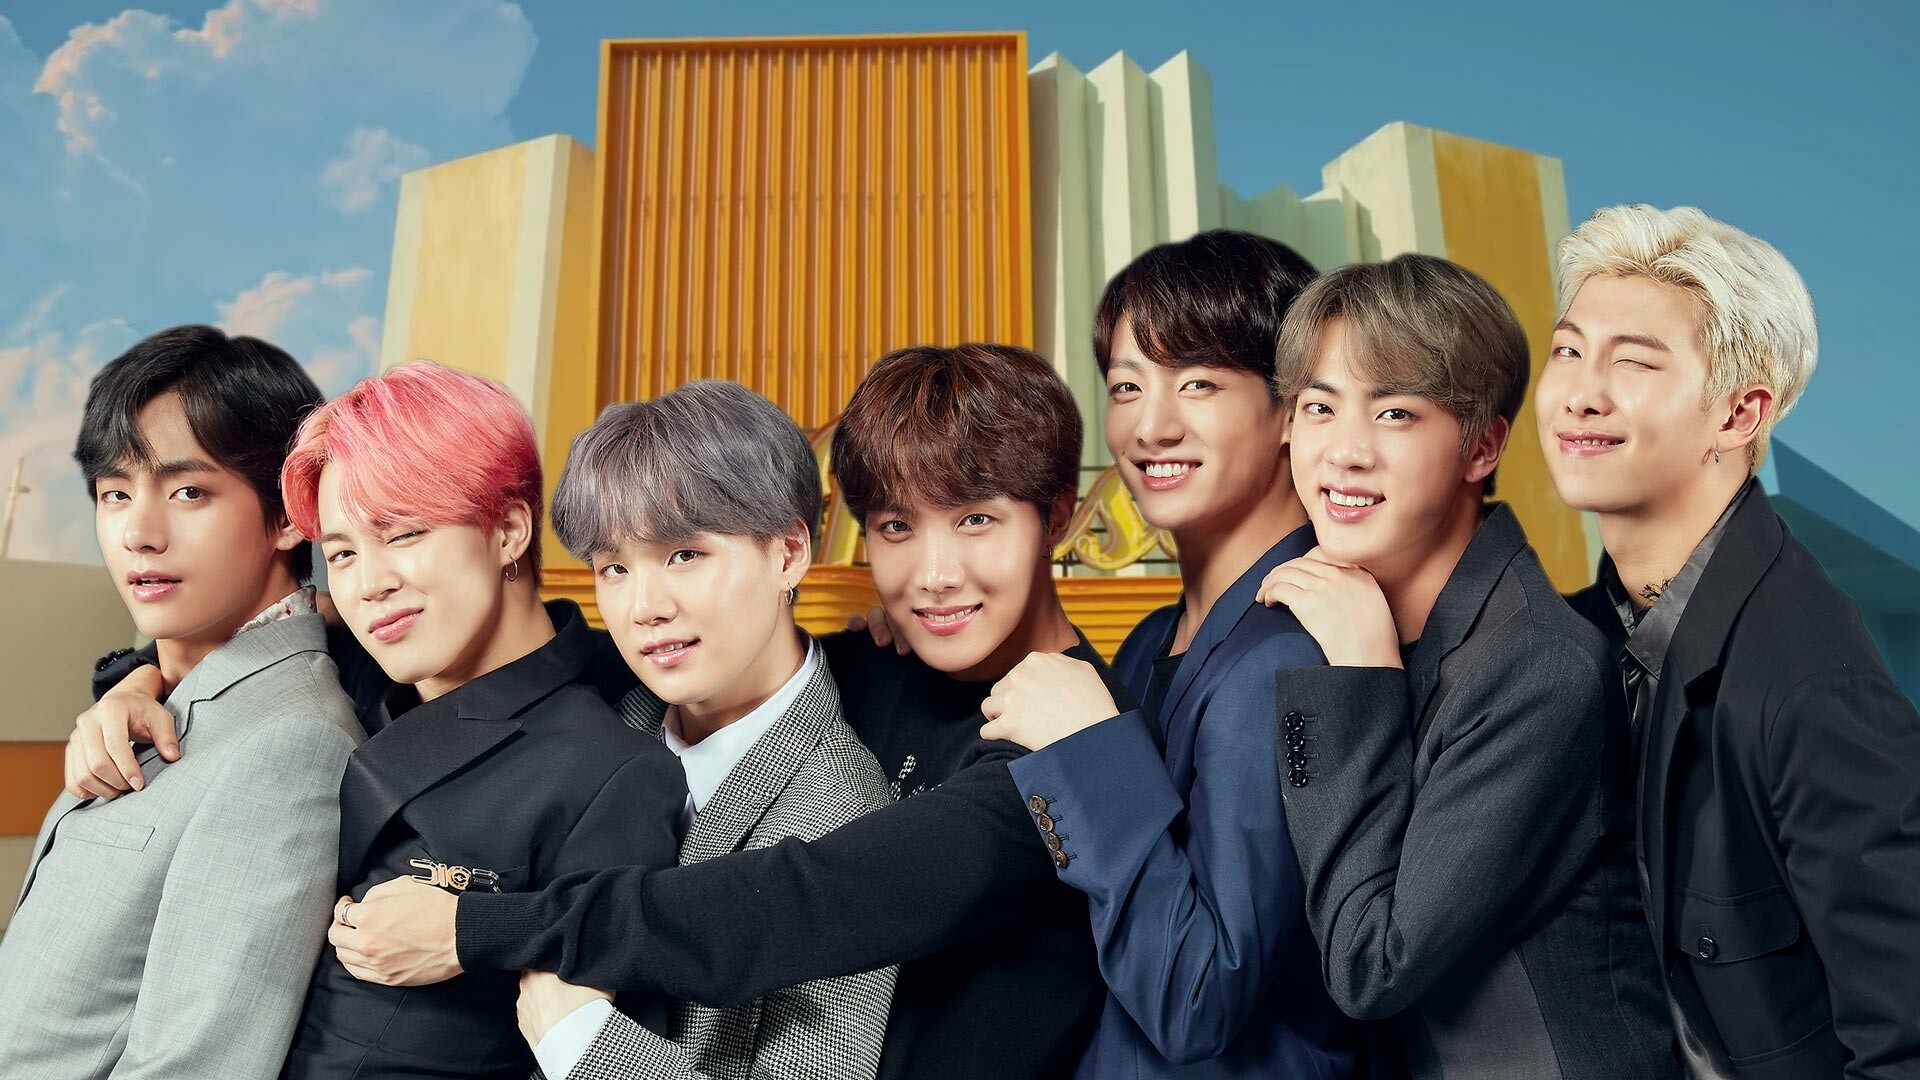 BTS: The band launched their first Japanese studio album, Wake Up, in December 2014. 1920x1080 Full HD Background.